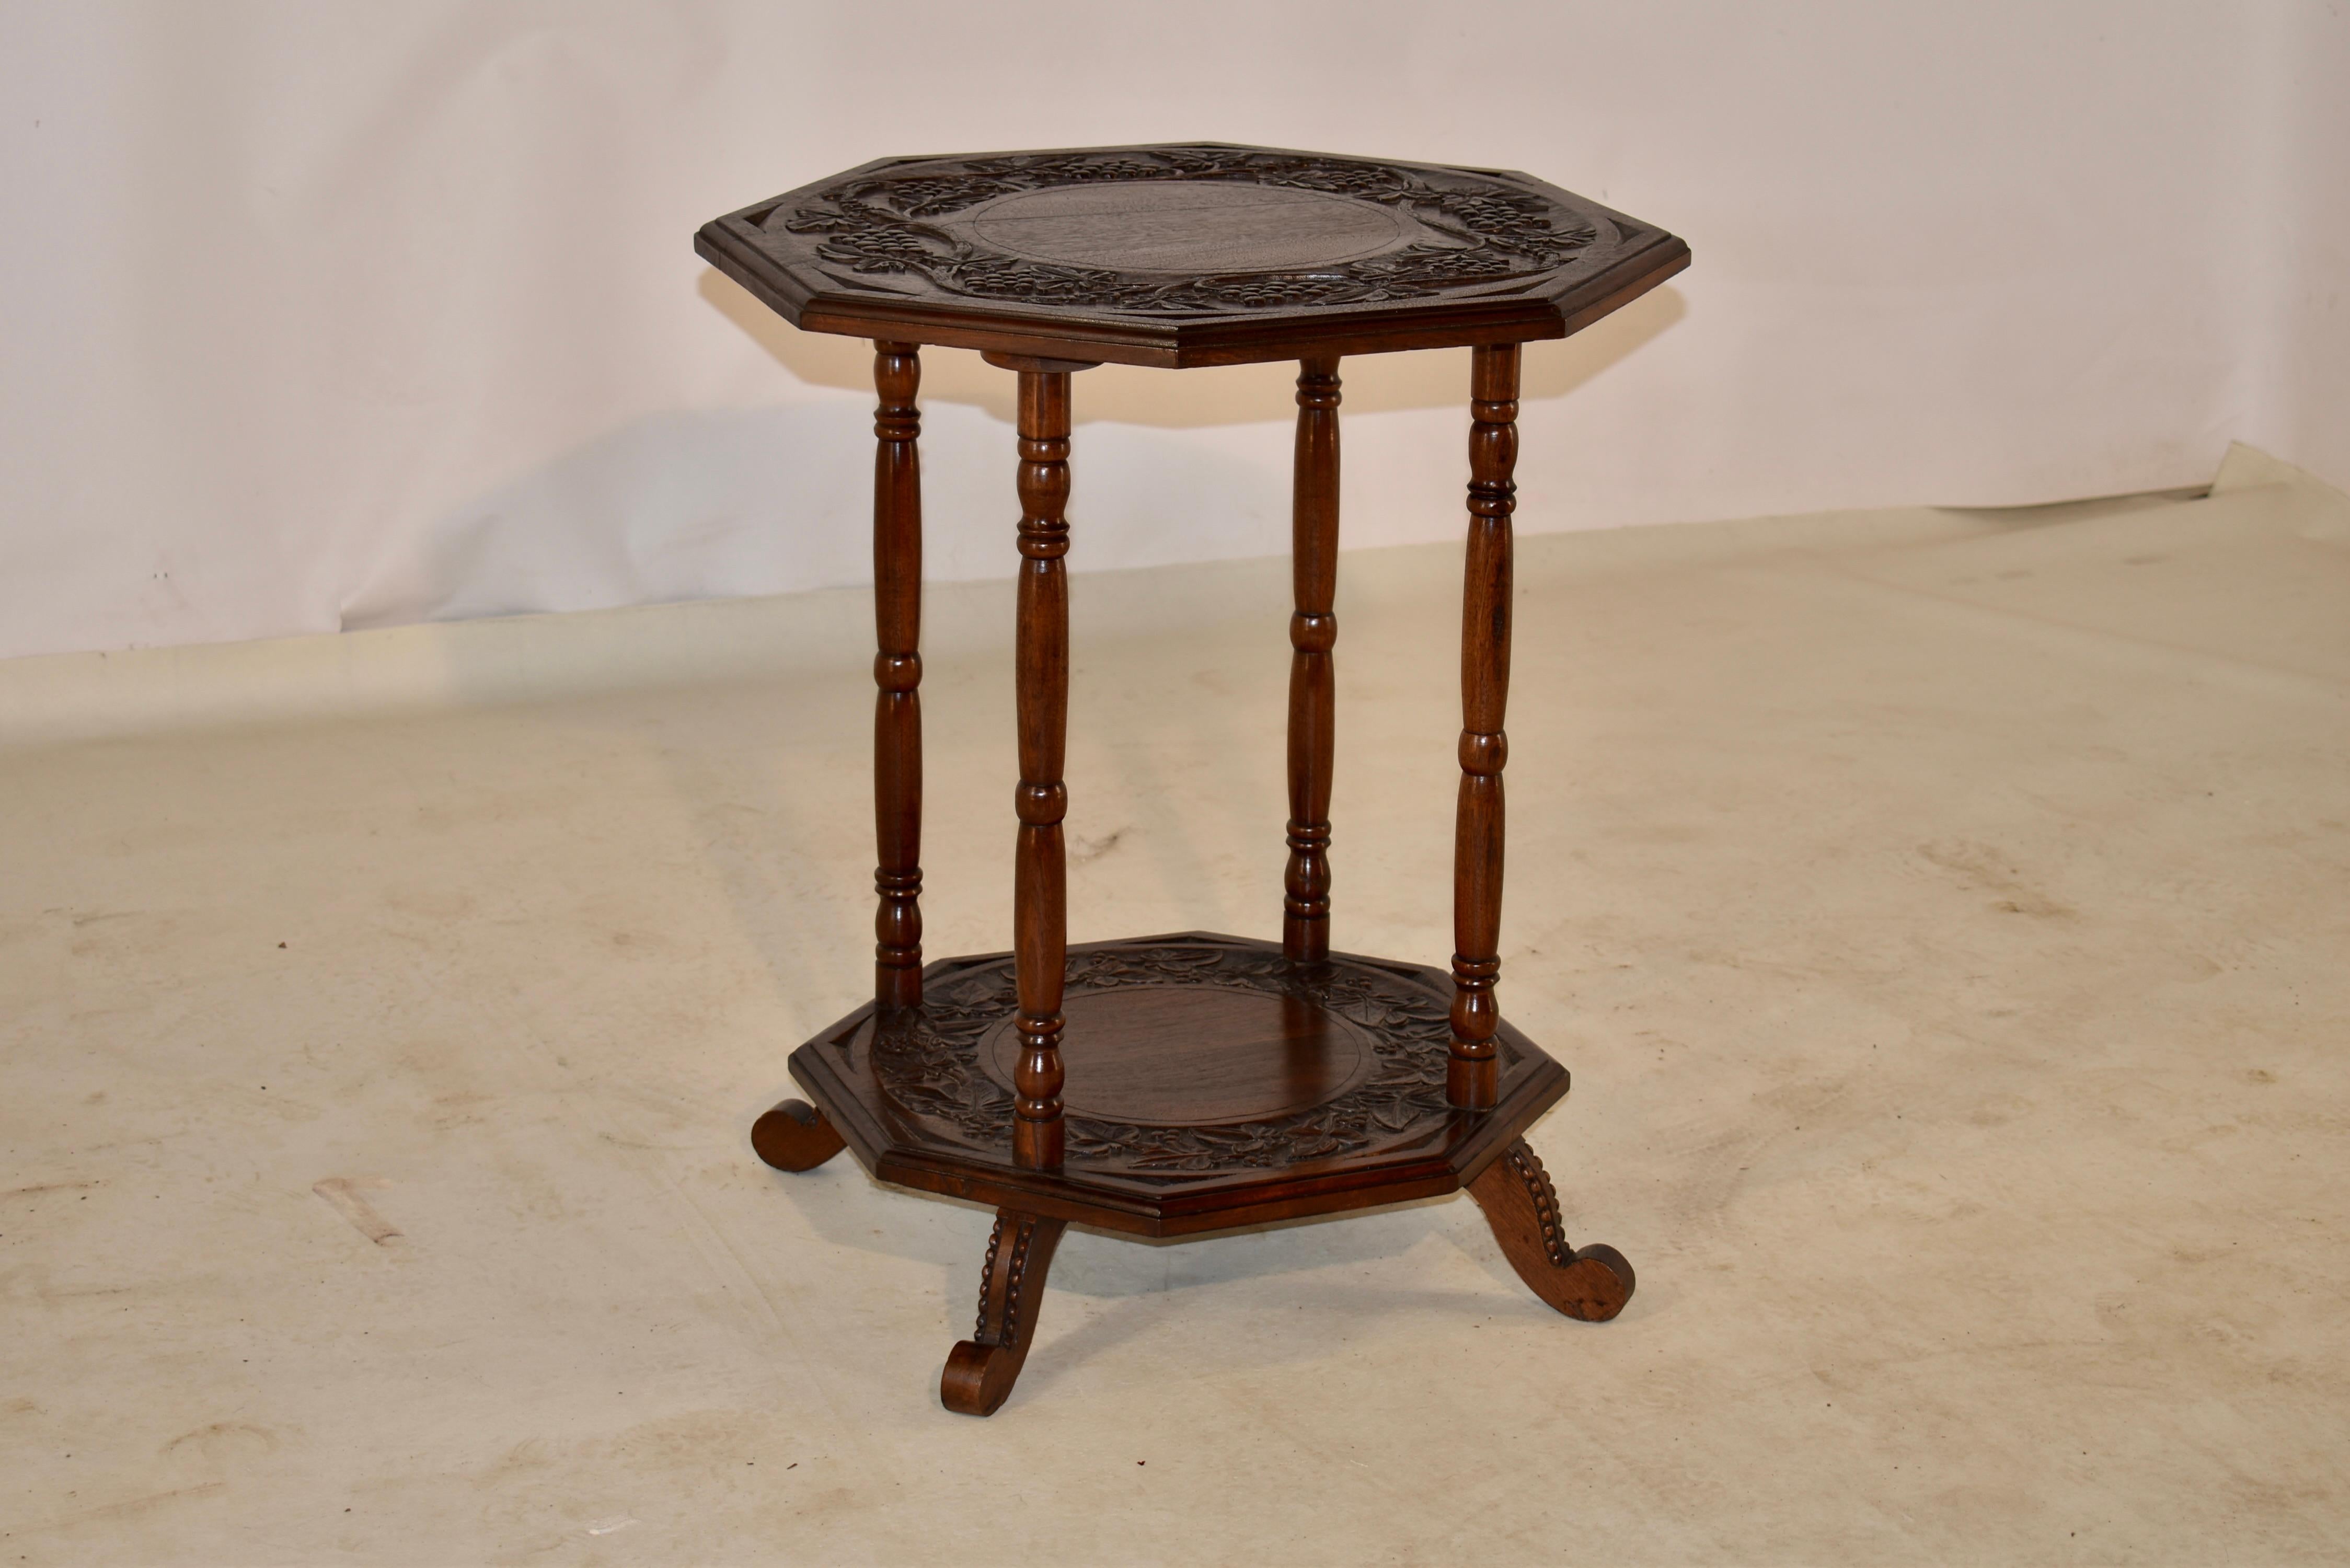 19th century oak side table from England with an octagonal shaped top with a carved decorated band and beveled edge over four turned legs, joined by a lower shelf, which mirrors the top of the table. The table is supported on hand shaped feet, which